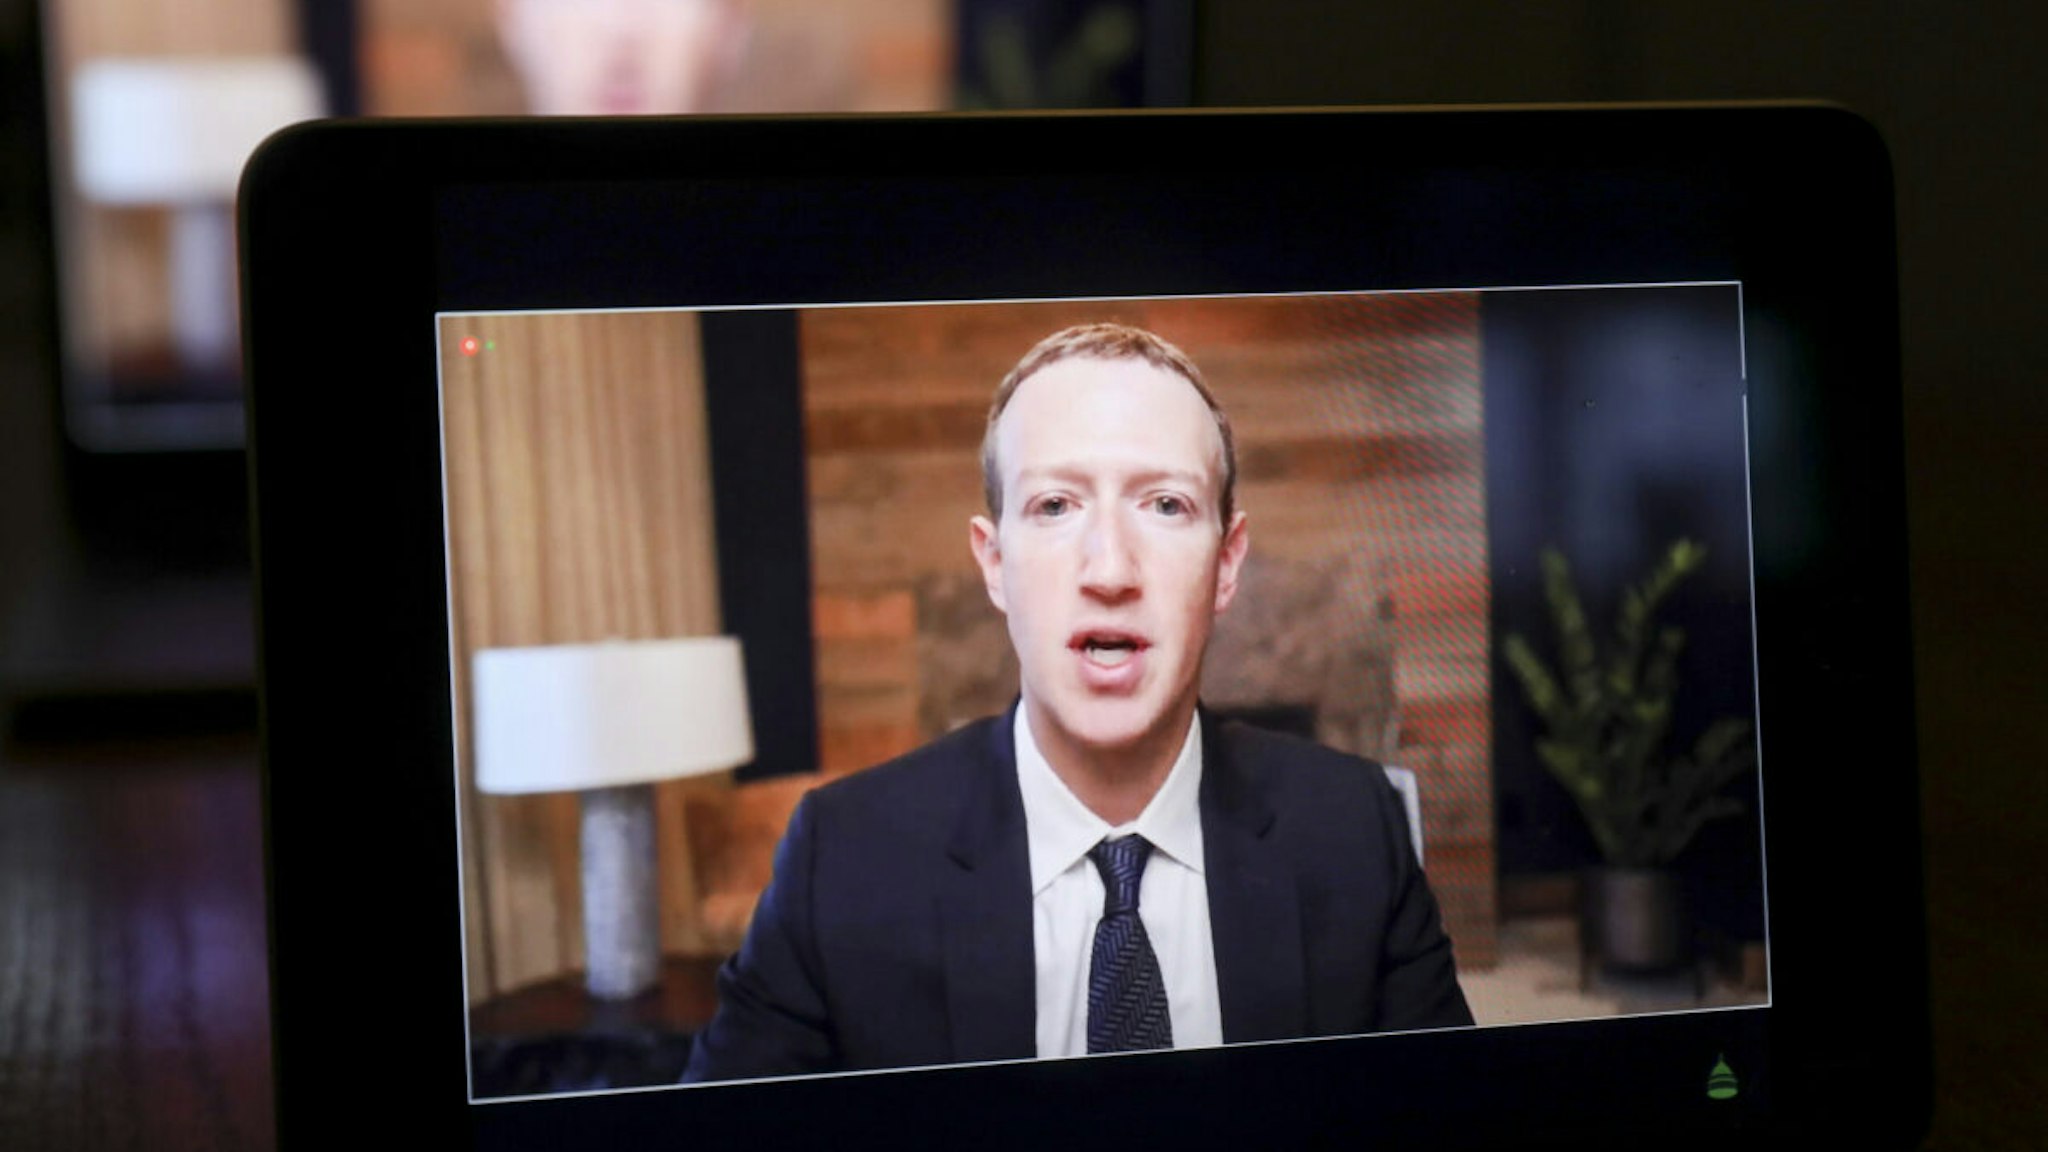 Meta CEO Mark Zuckerberg speaks virtually during a House Energy and Commerce Subcommittees hearing on a laptop computer in Tiskilwa, Illinois, U.S., on Thursday, March 25, 2021.